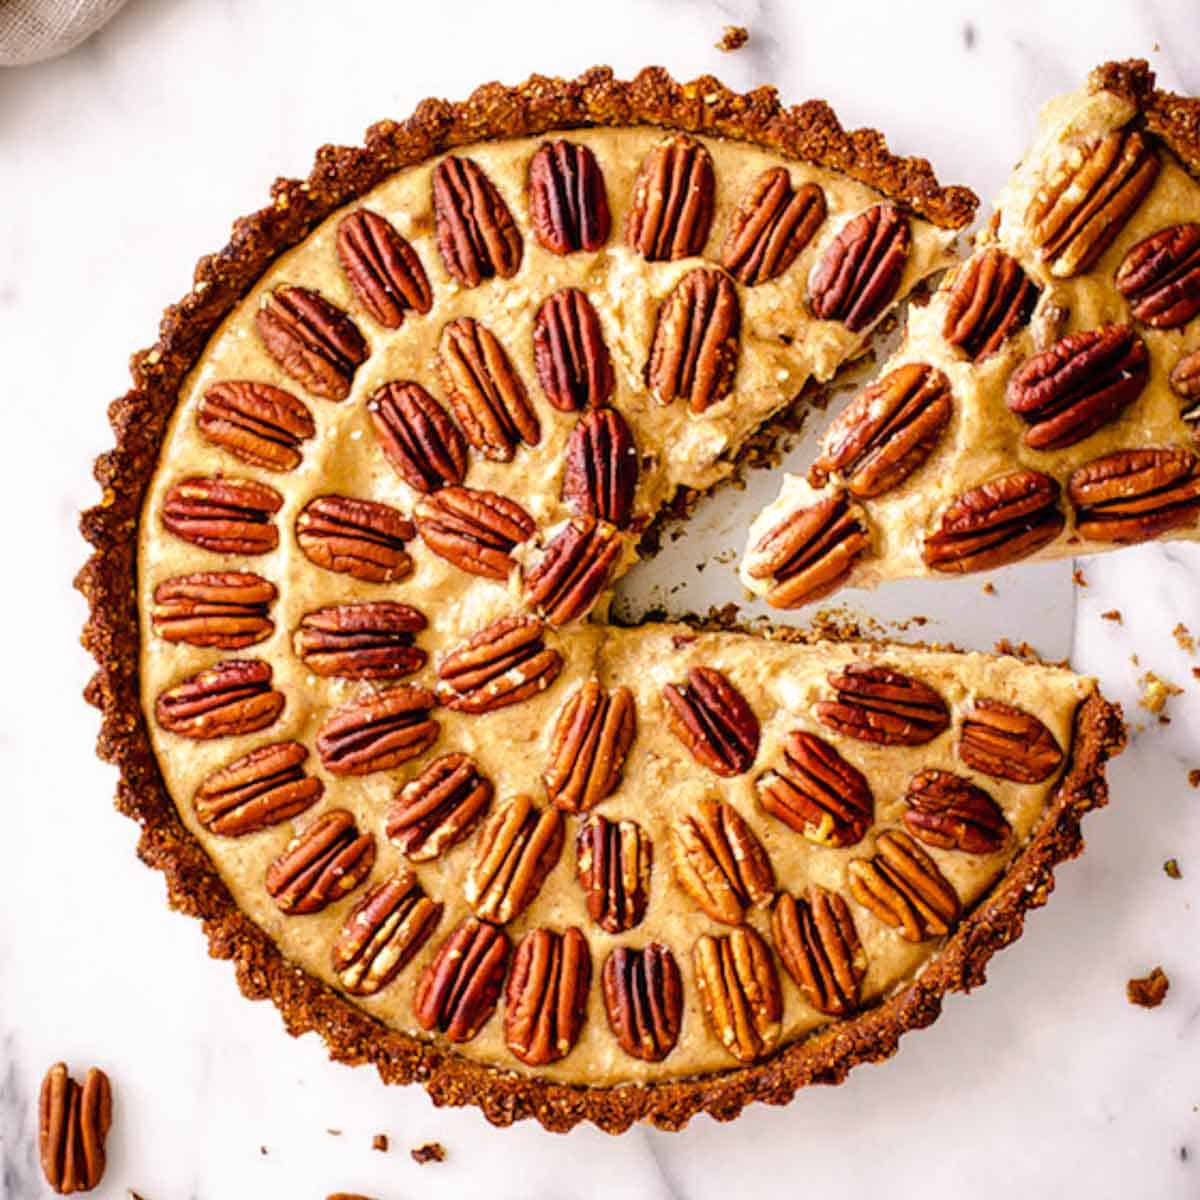 Overhead view of vegan pecan pie with concentric circles of pecans. A slice is being taken.